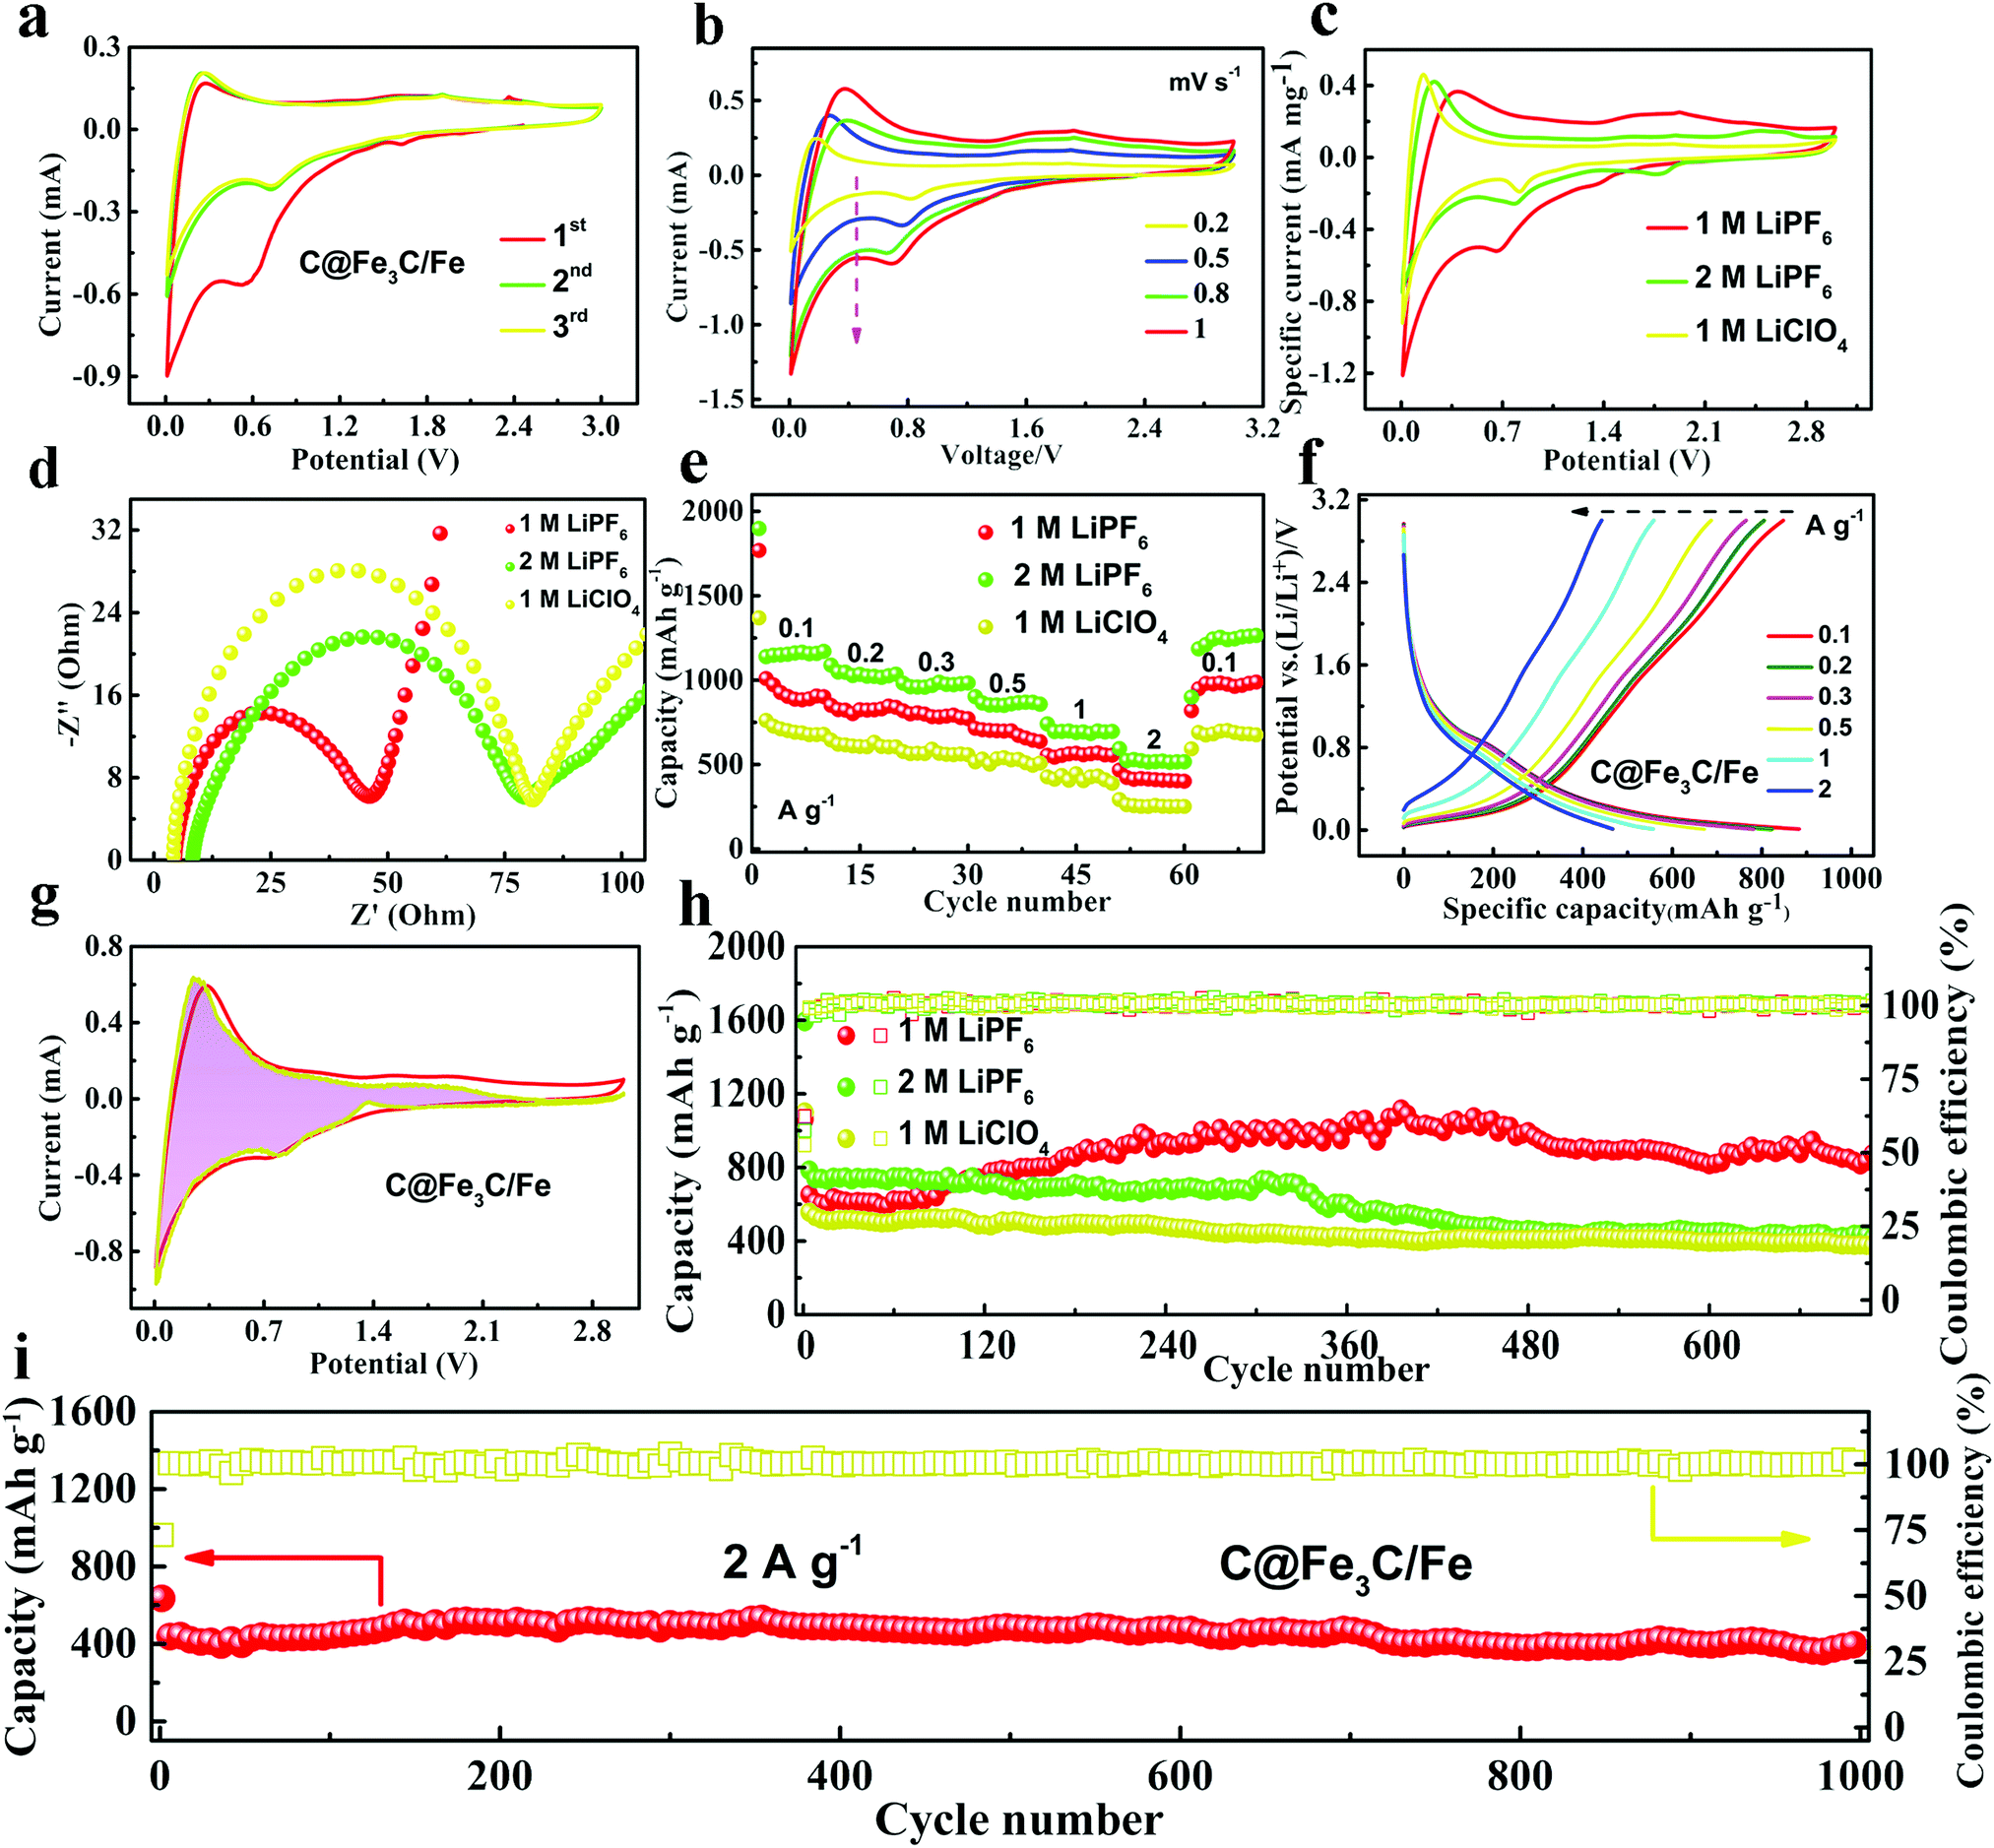 Origin Of Extra Capacity In The Solid Electrolyte Interphase Near High Capacity Iron Carbide Anodes For Li Ion Batteries Energy Environmental Science Rsc Publishing